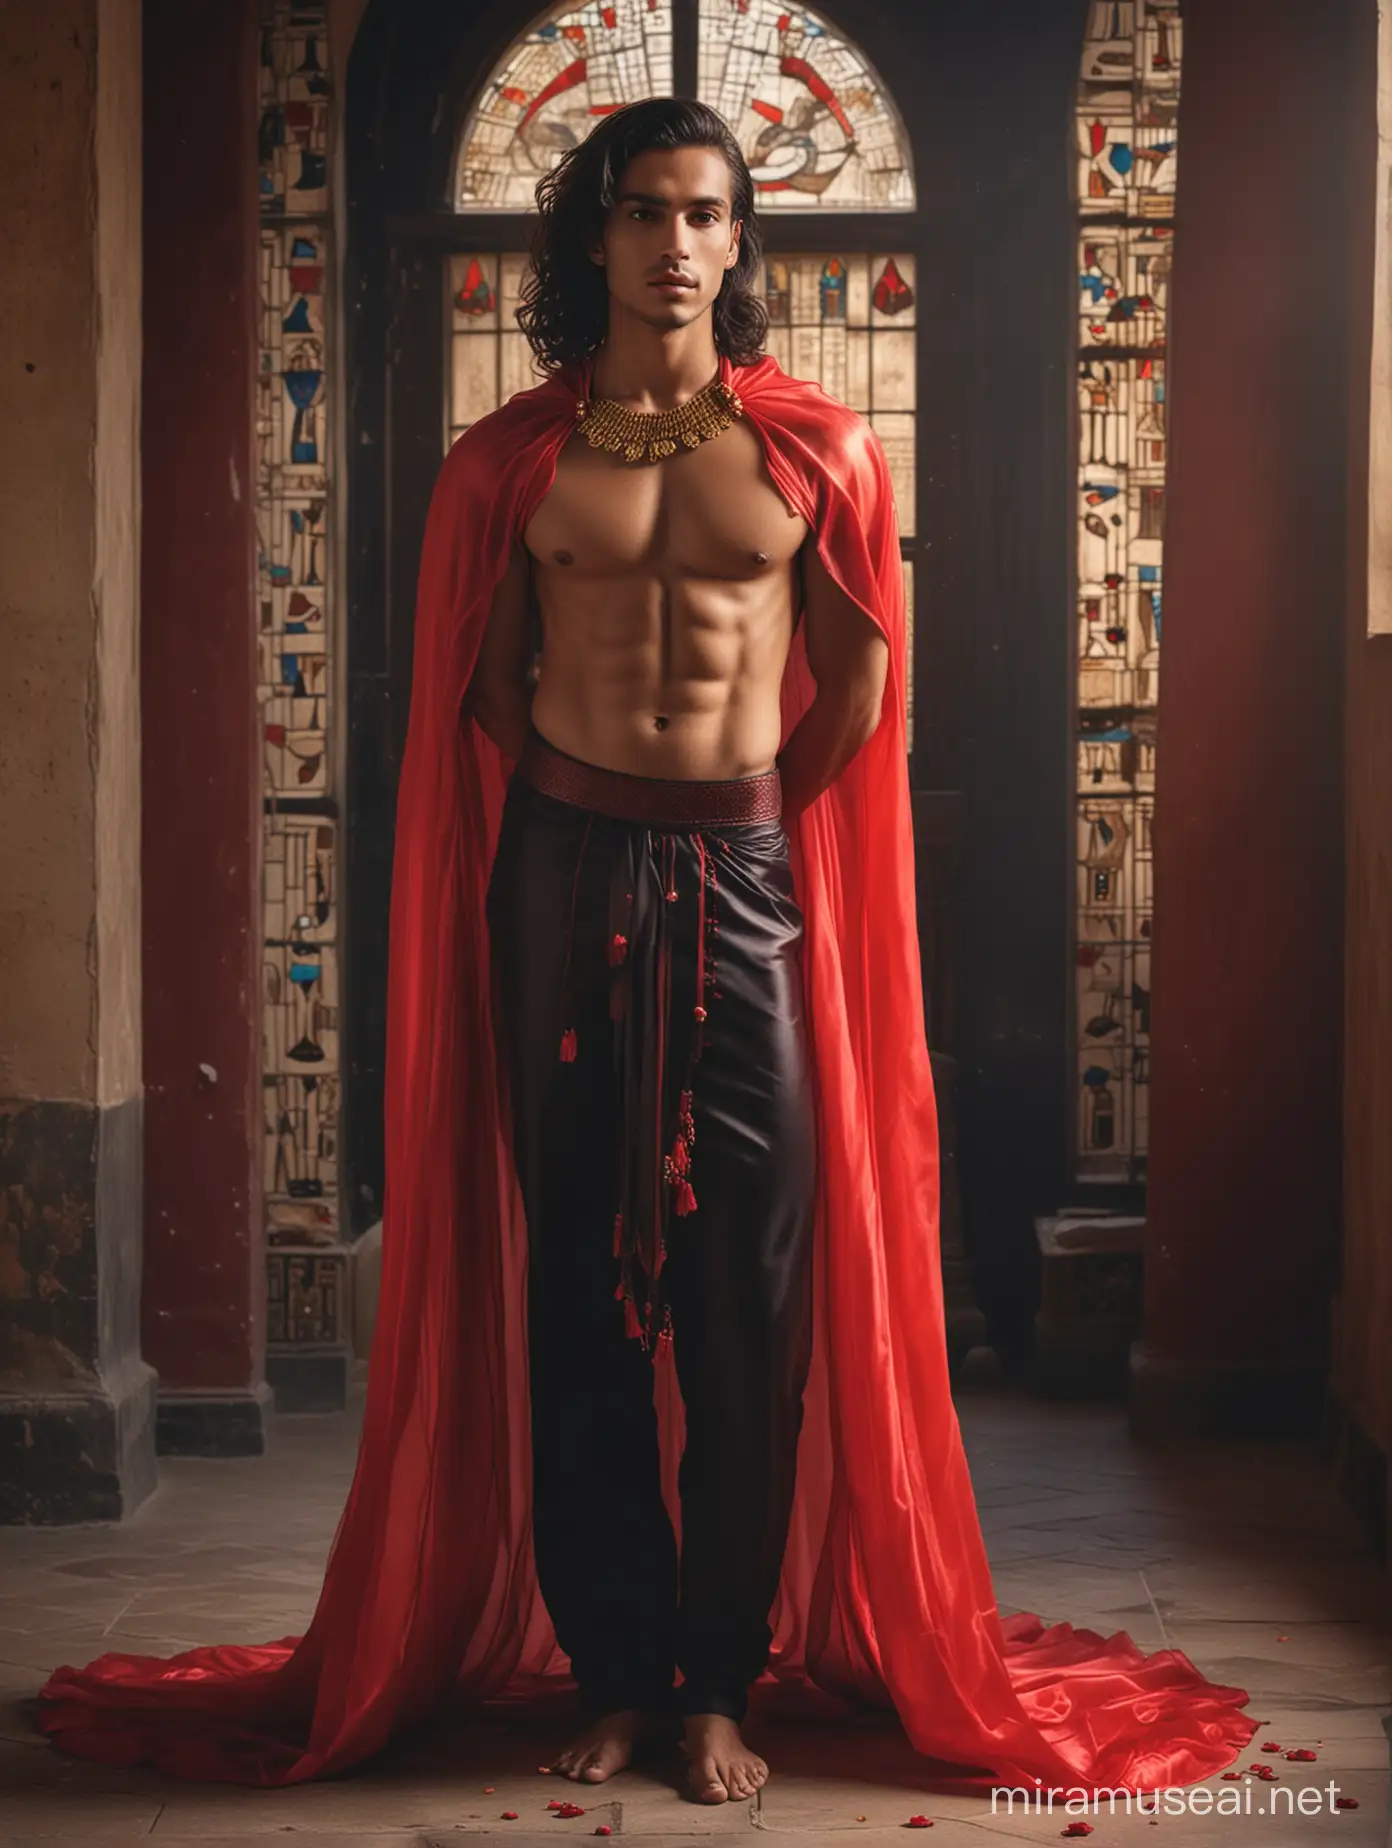 Attractive Male Model in Translucent Red Outfit Standing in Opulent Ancient EgyptianInspired Room